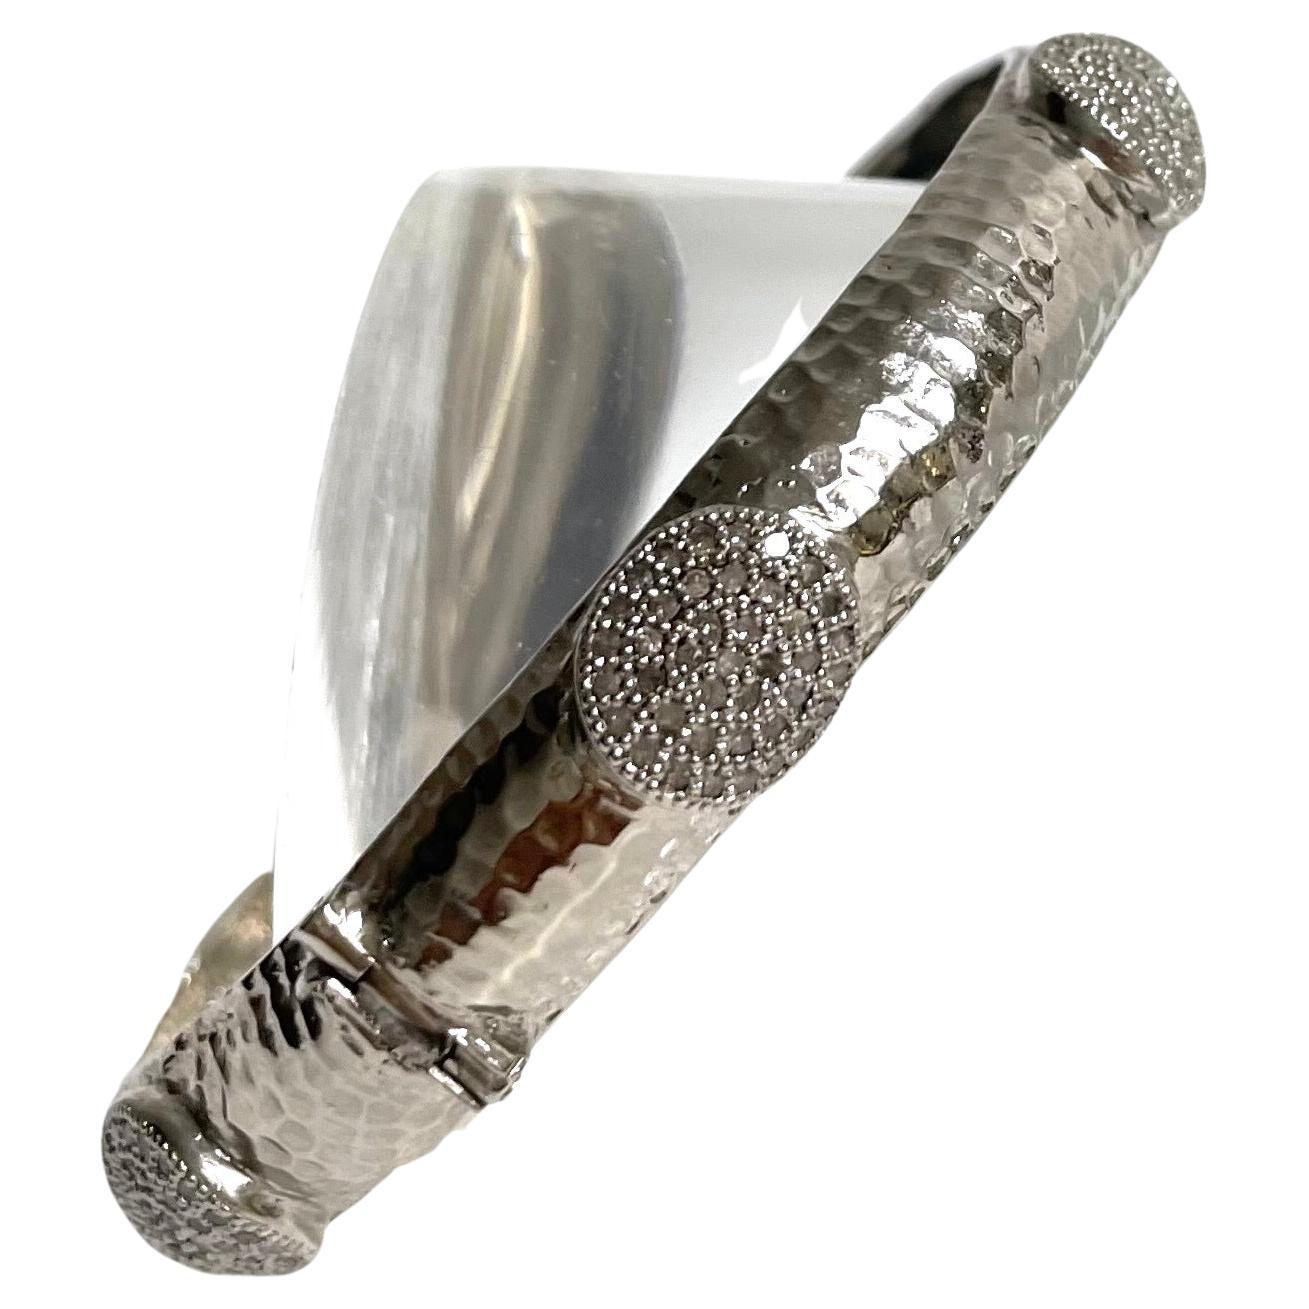  Hammered Rhodium-Plated Silver Bangle with Diamonds Paradizia Bracelet For Sale 5